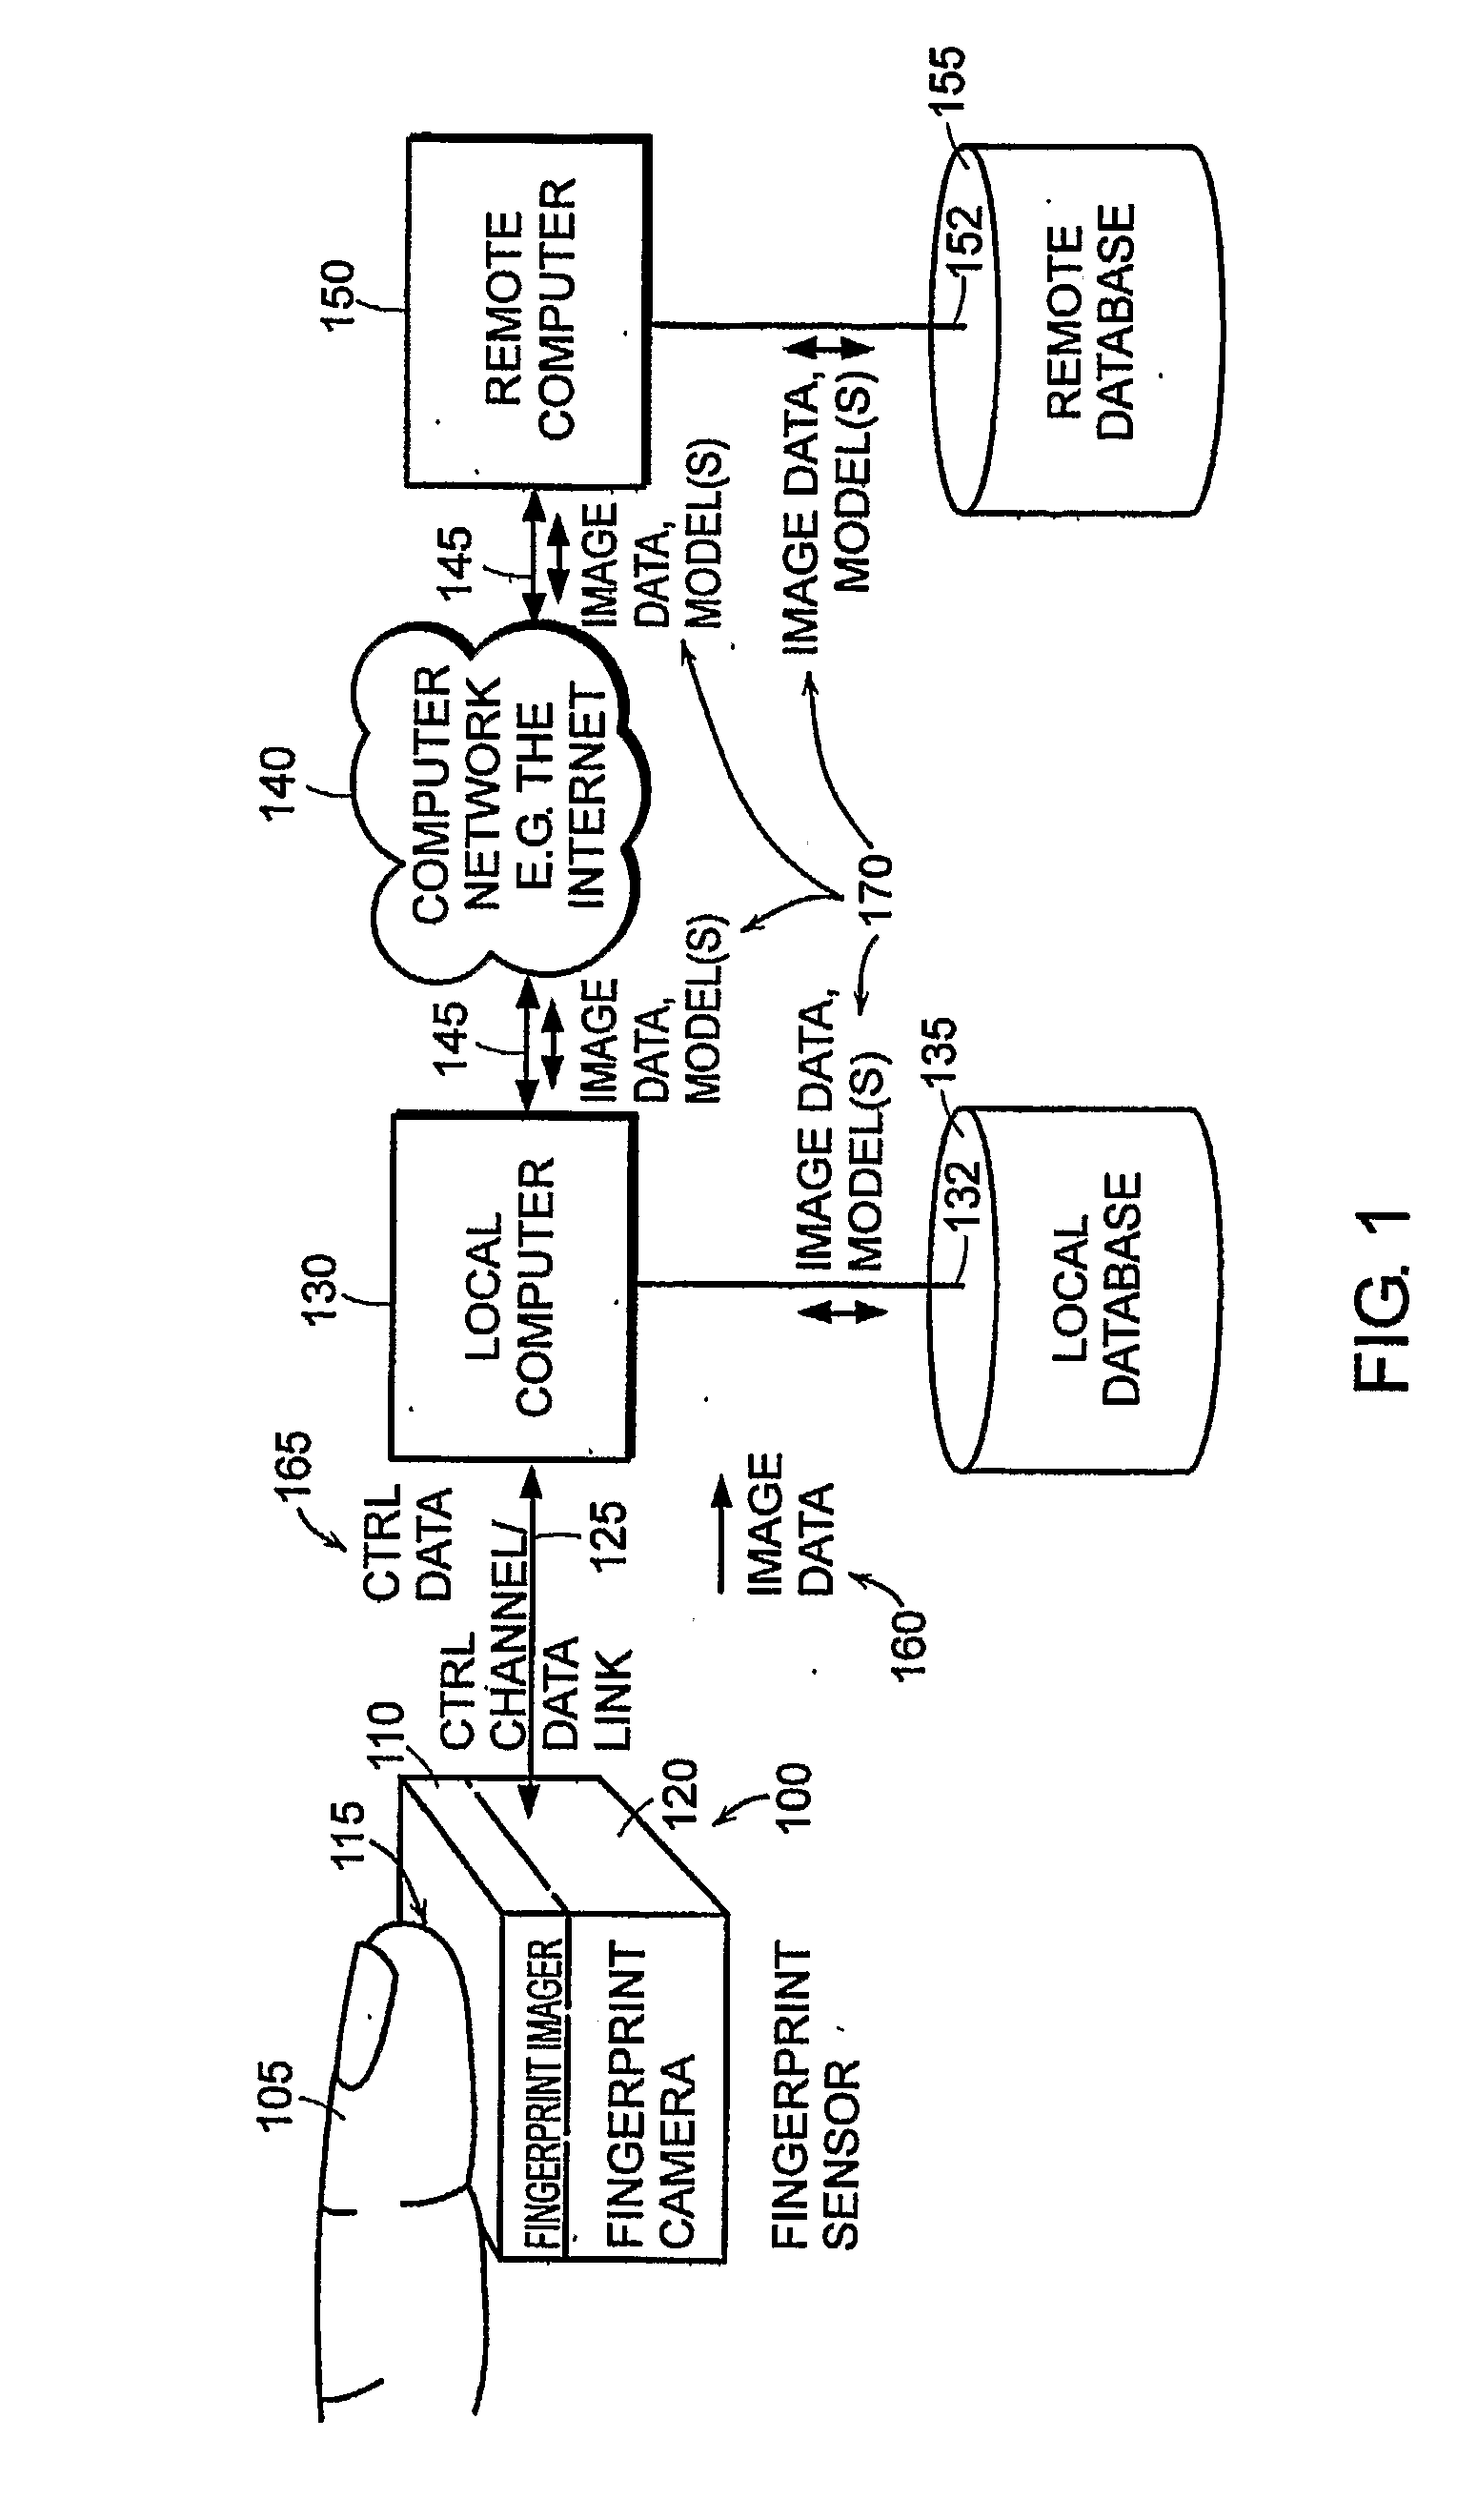 Method and apparatus for processing biometric images